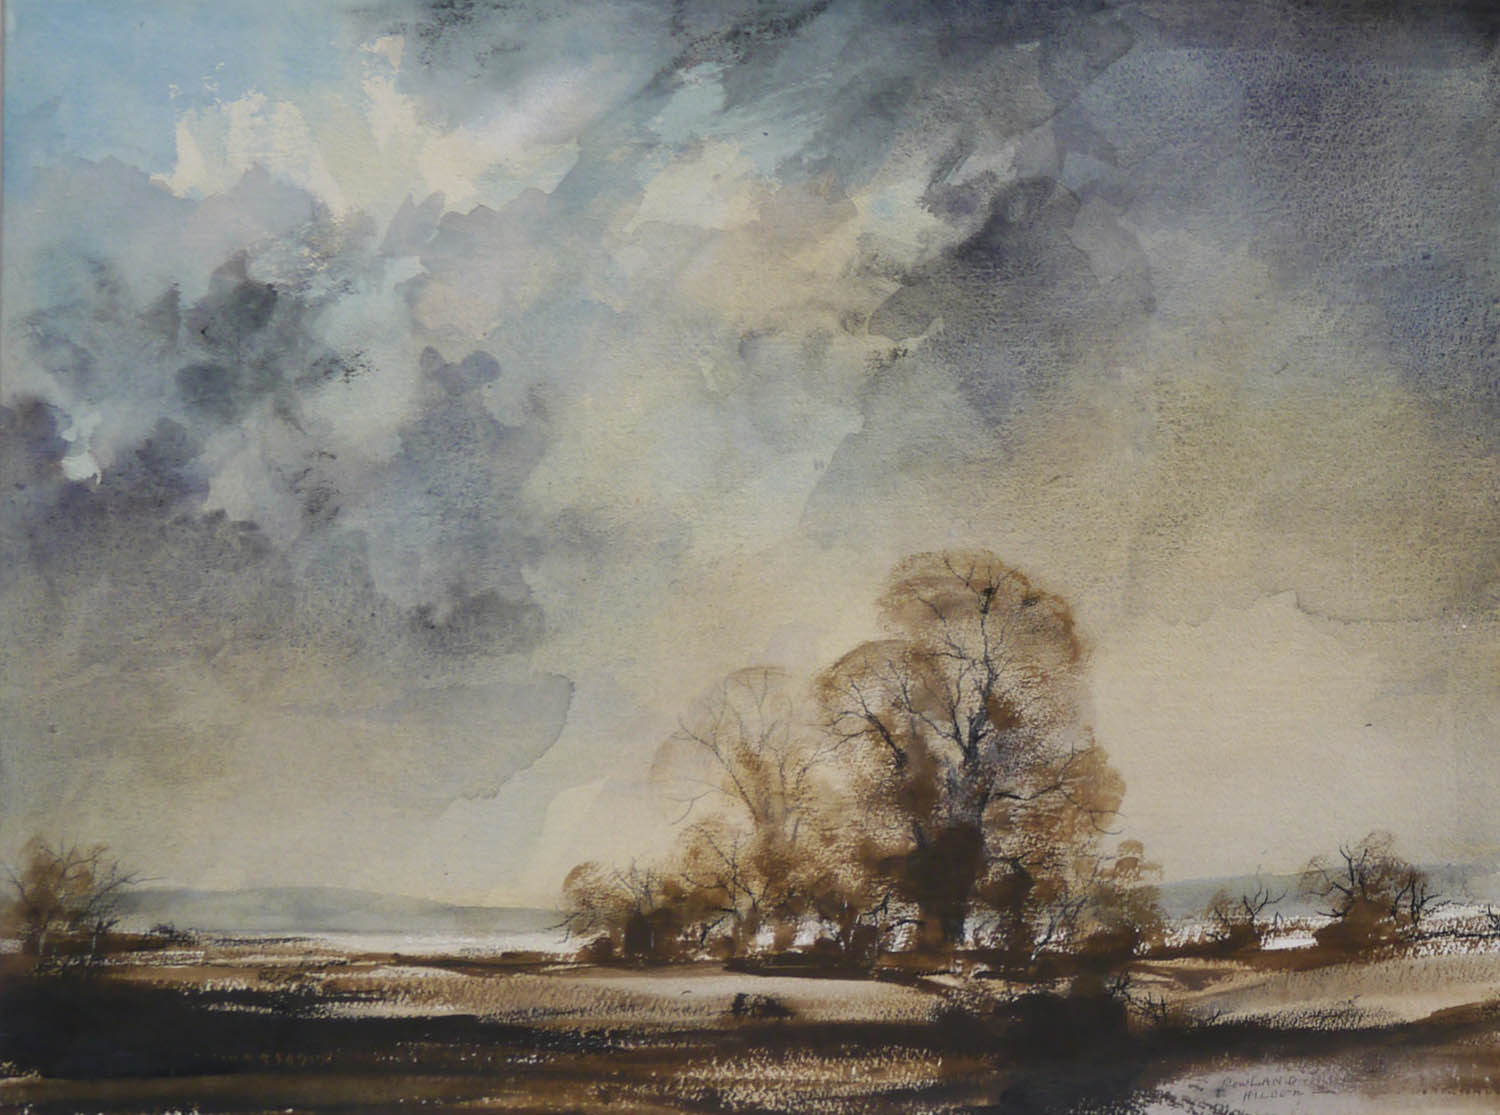 Autumn landscape by the Swale